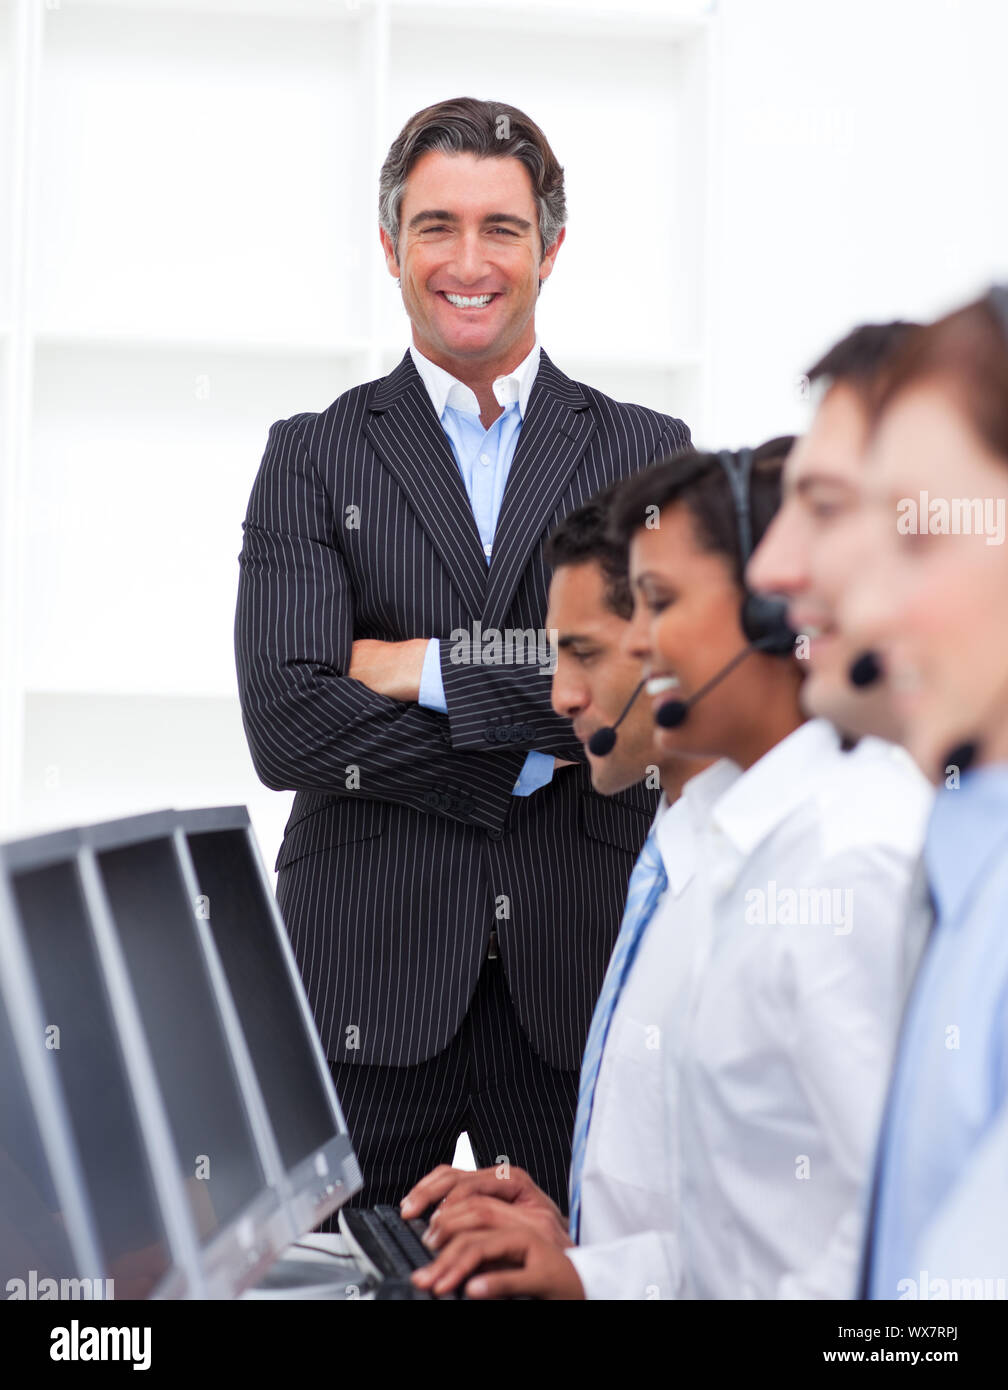 Self-assured businessman presenting a call center in a company Stock Photo